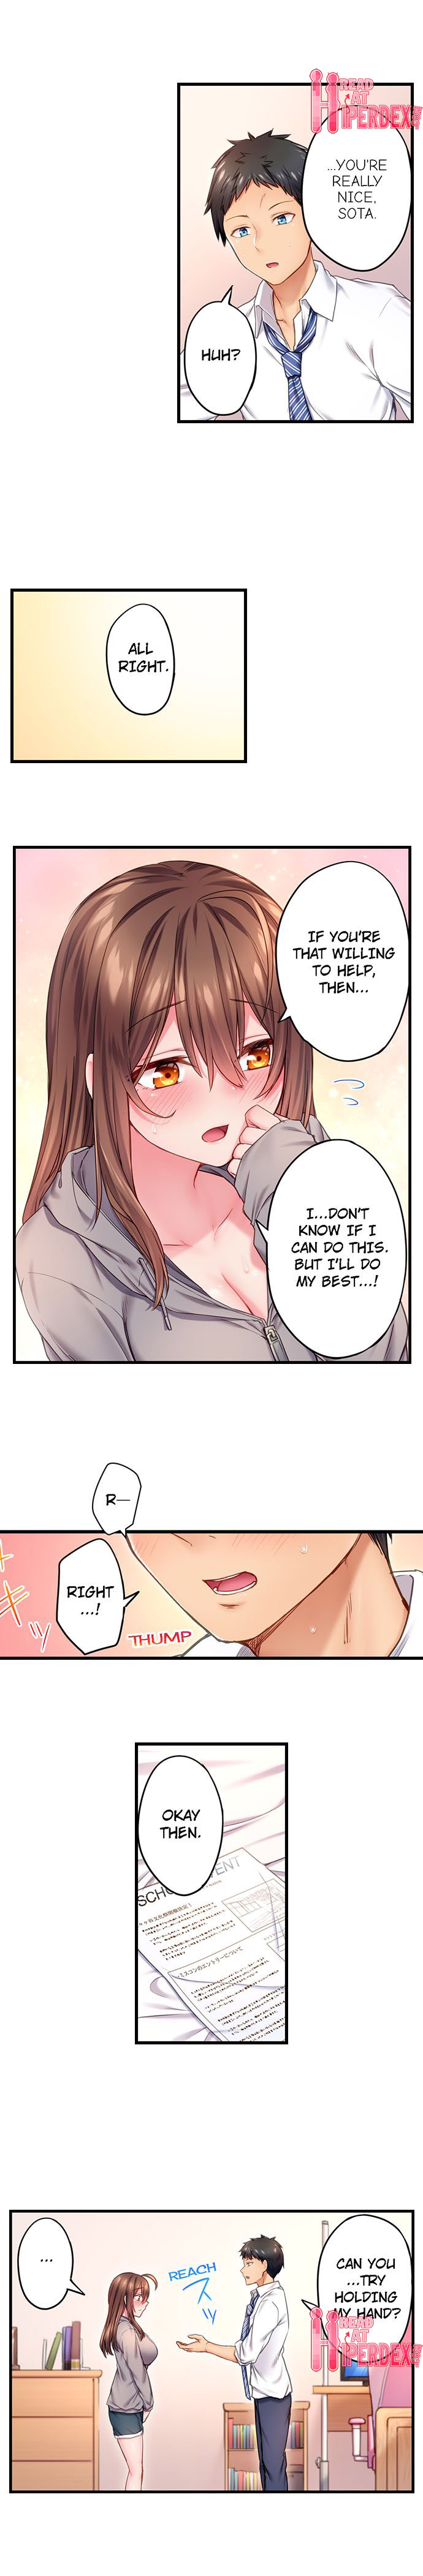 Can’t Believe My Loner Childhood Friend Became This Sexy Girl - Chapter 2 Page 6